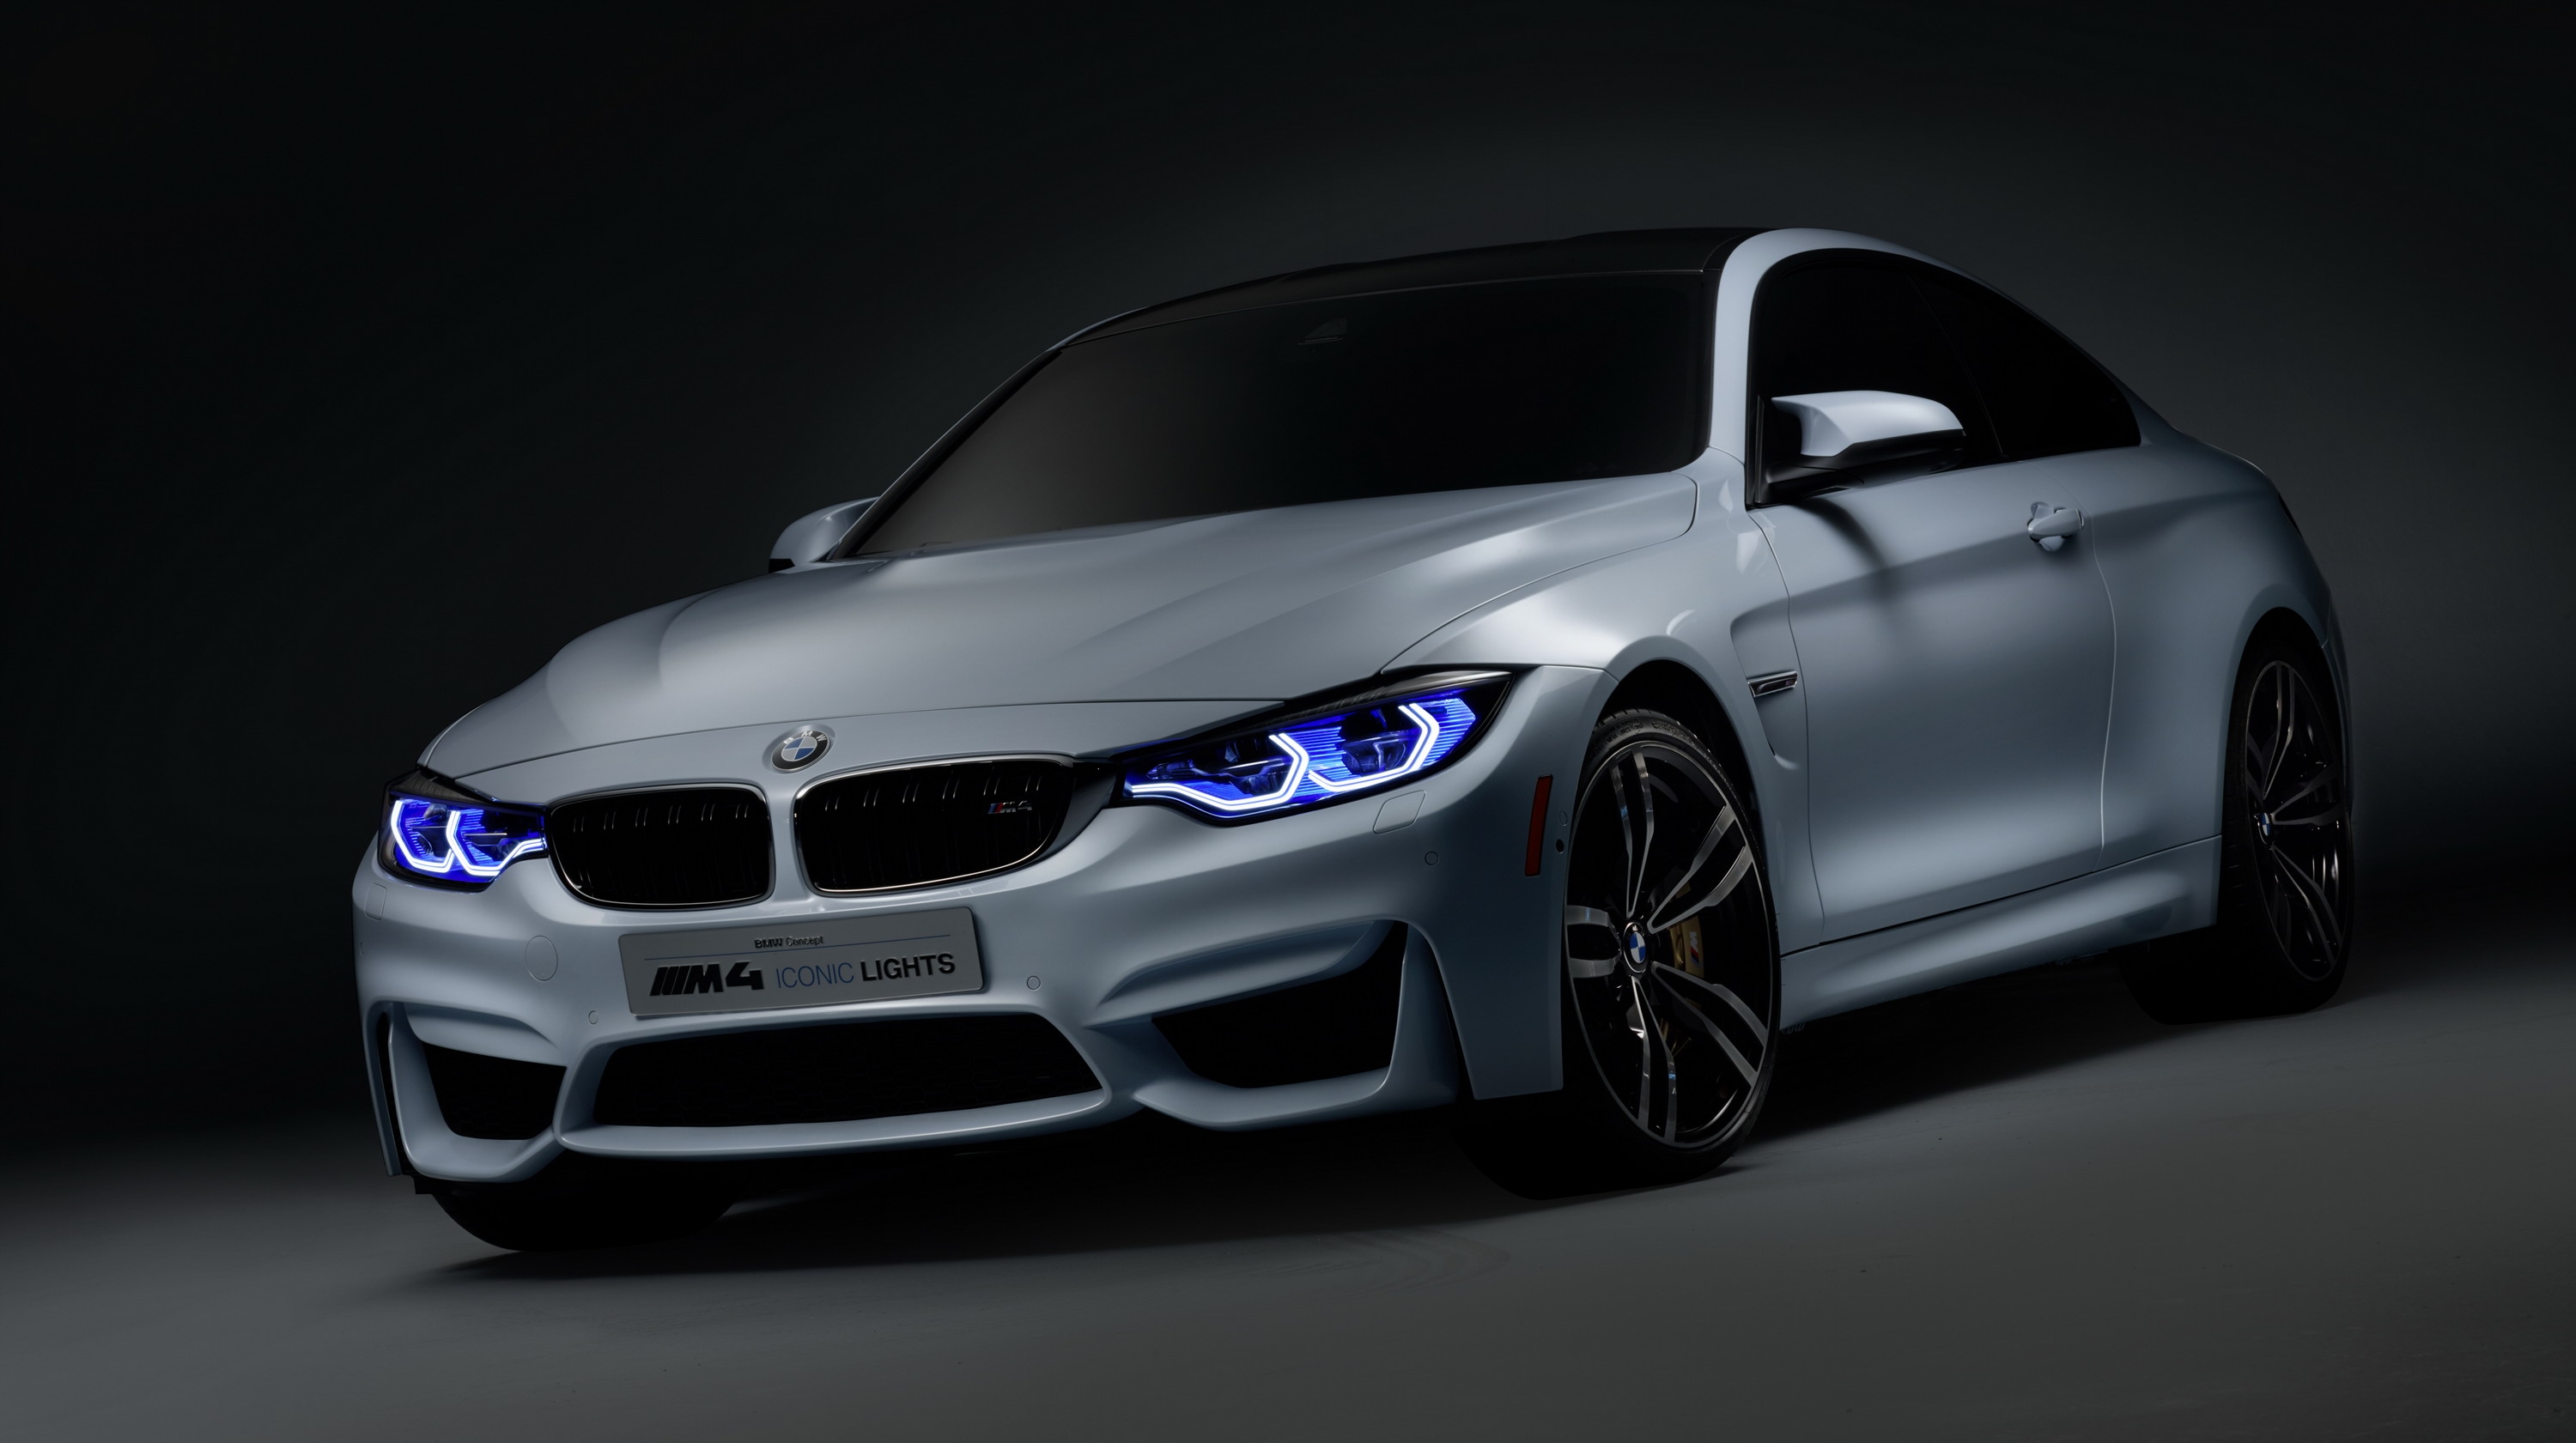 BMW M4 Concept Iconic Lights Picture, Photo, Wallpaper